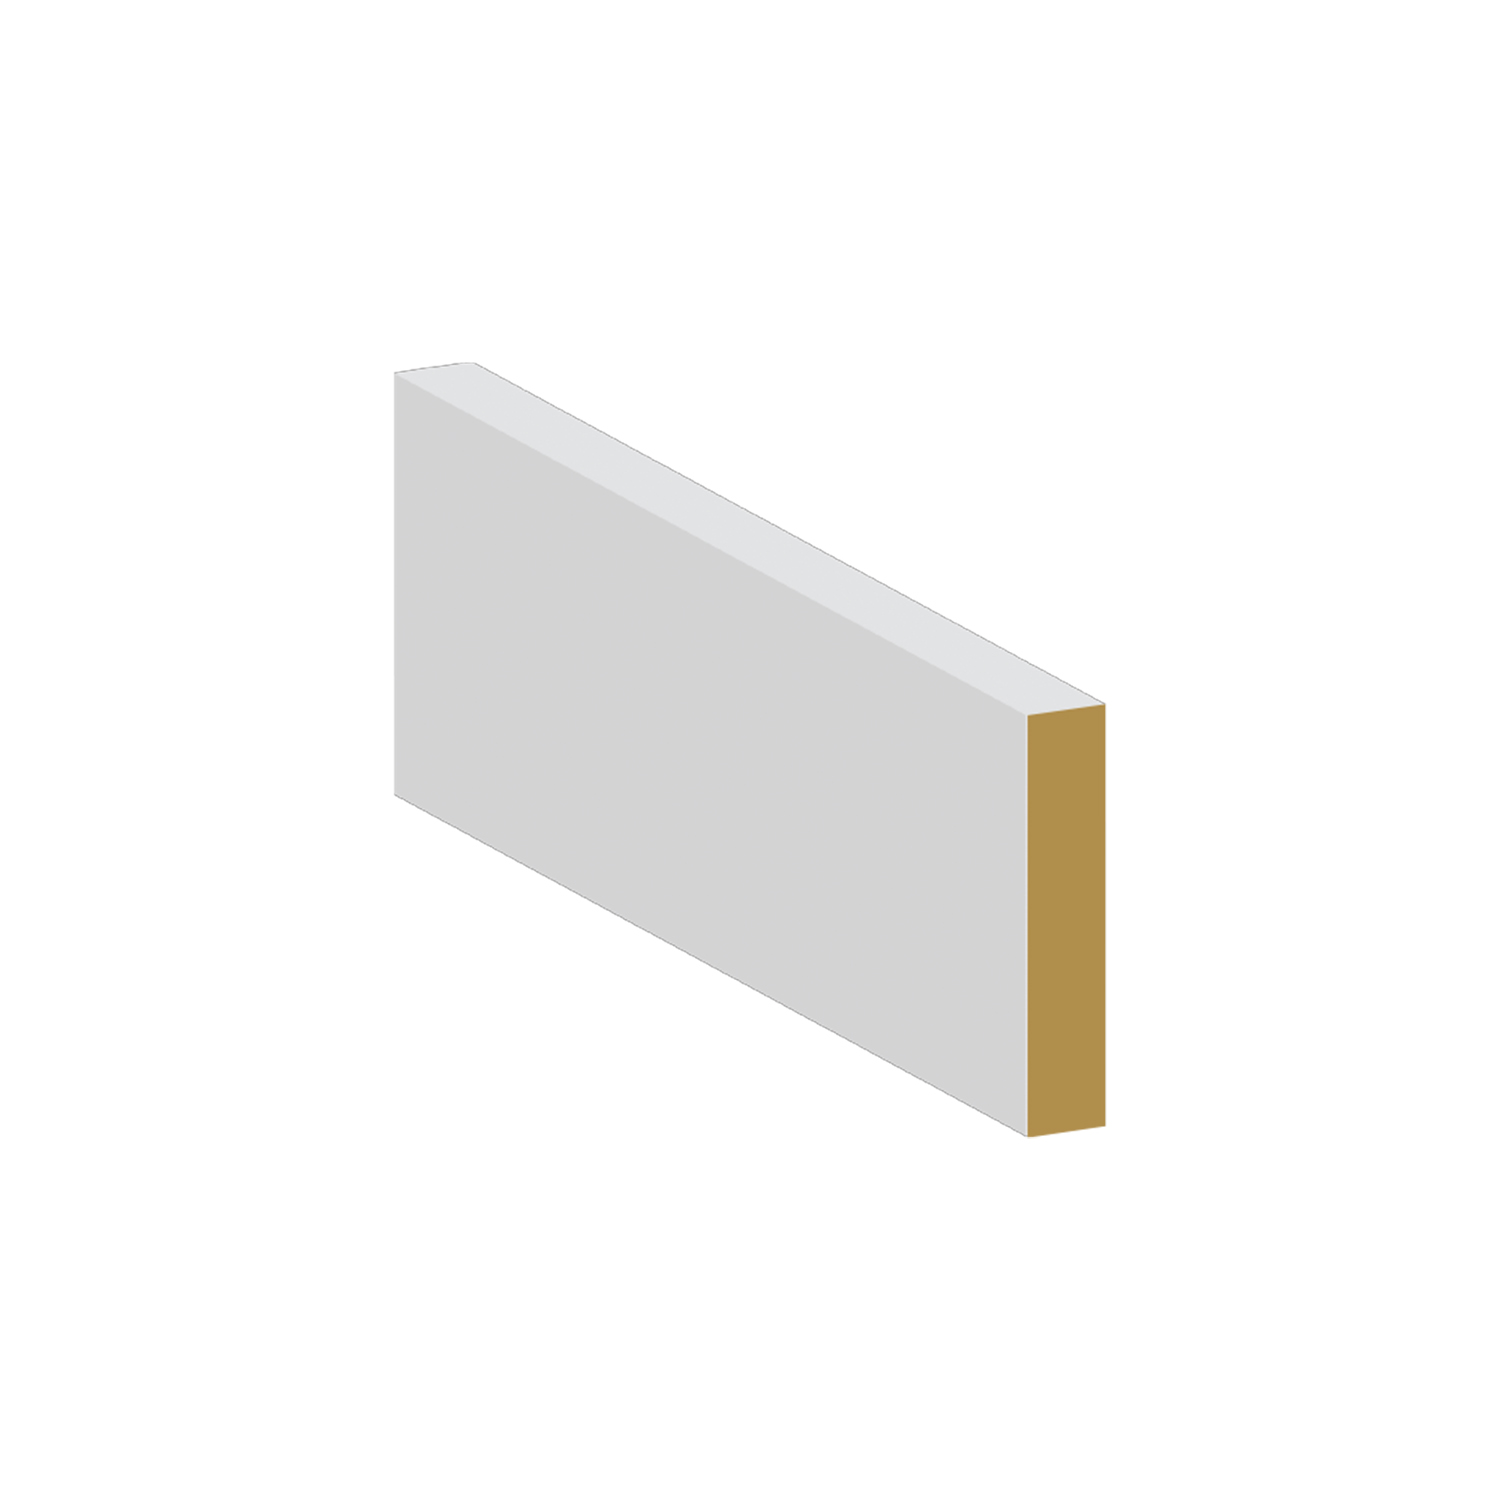 Casing MDF Eased Edge 3 1/2 x 3/4 x 8' - $1.19LF - Sold Per Piece